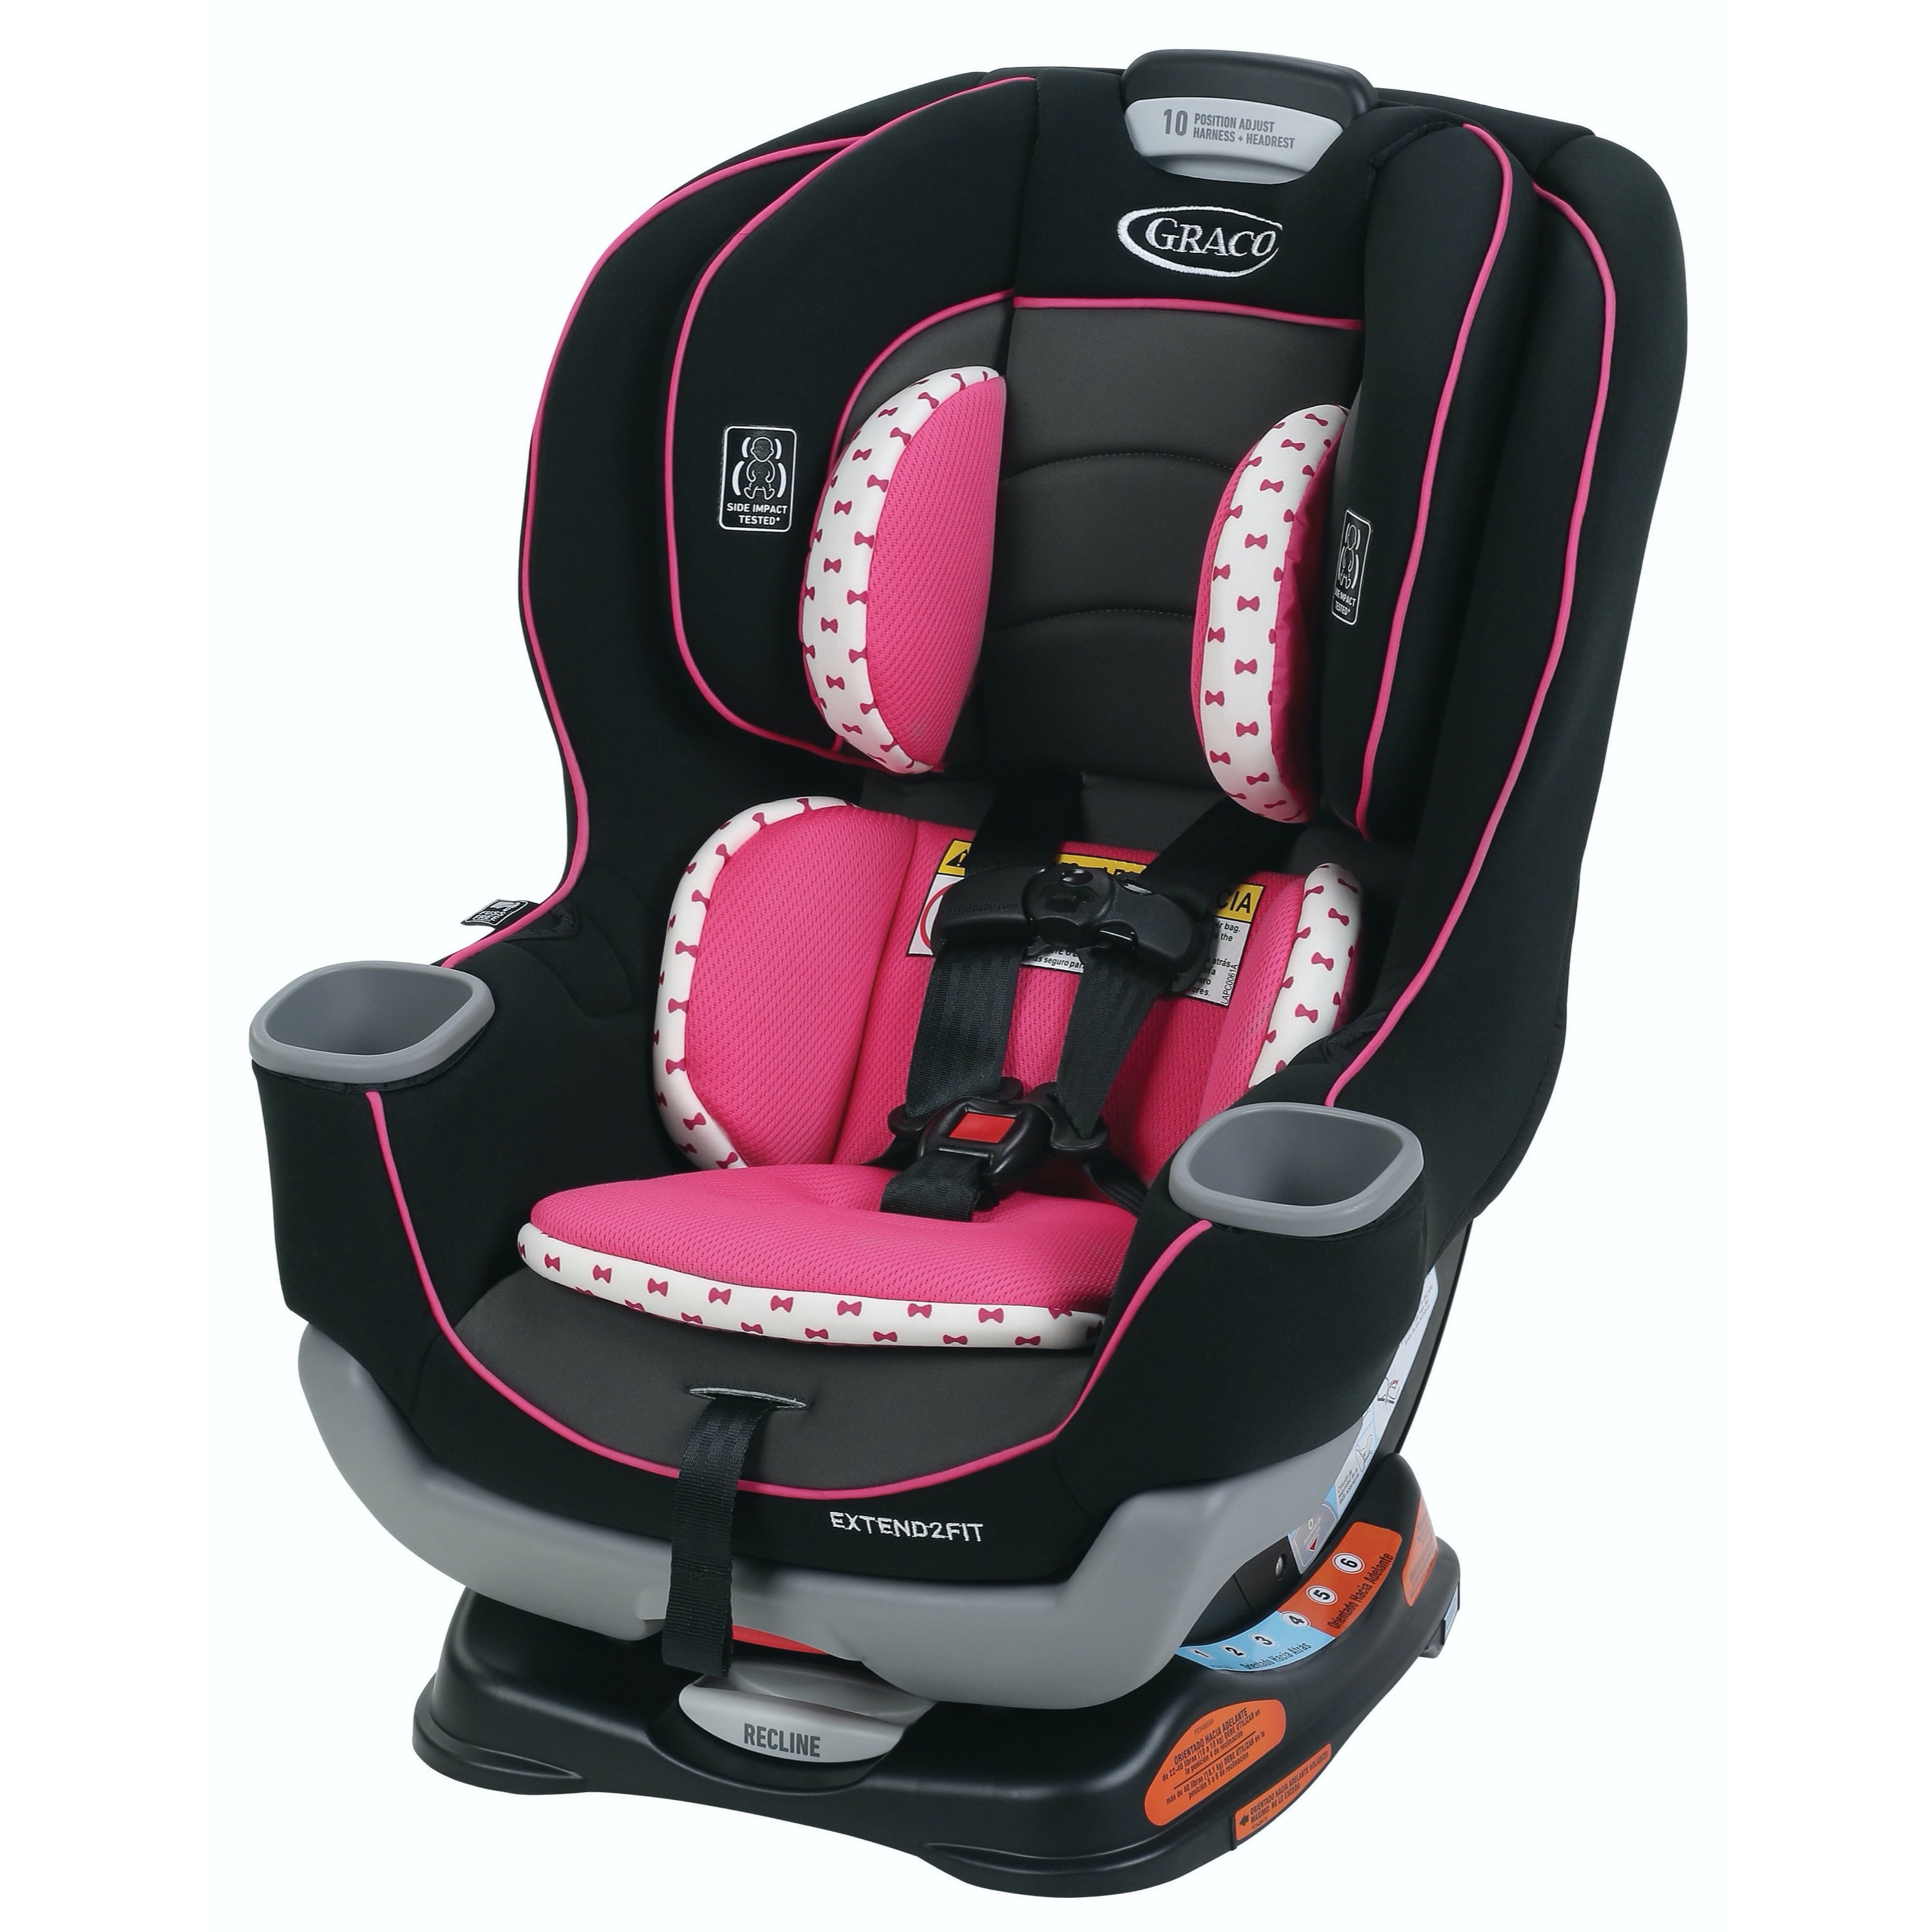 Graco Extend2Fit Convertible Car Seat 